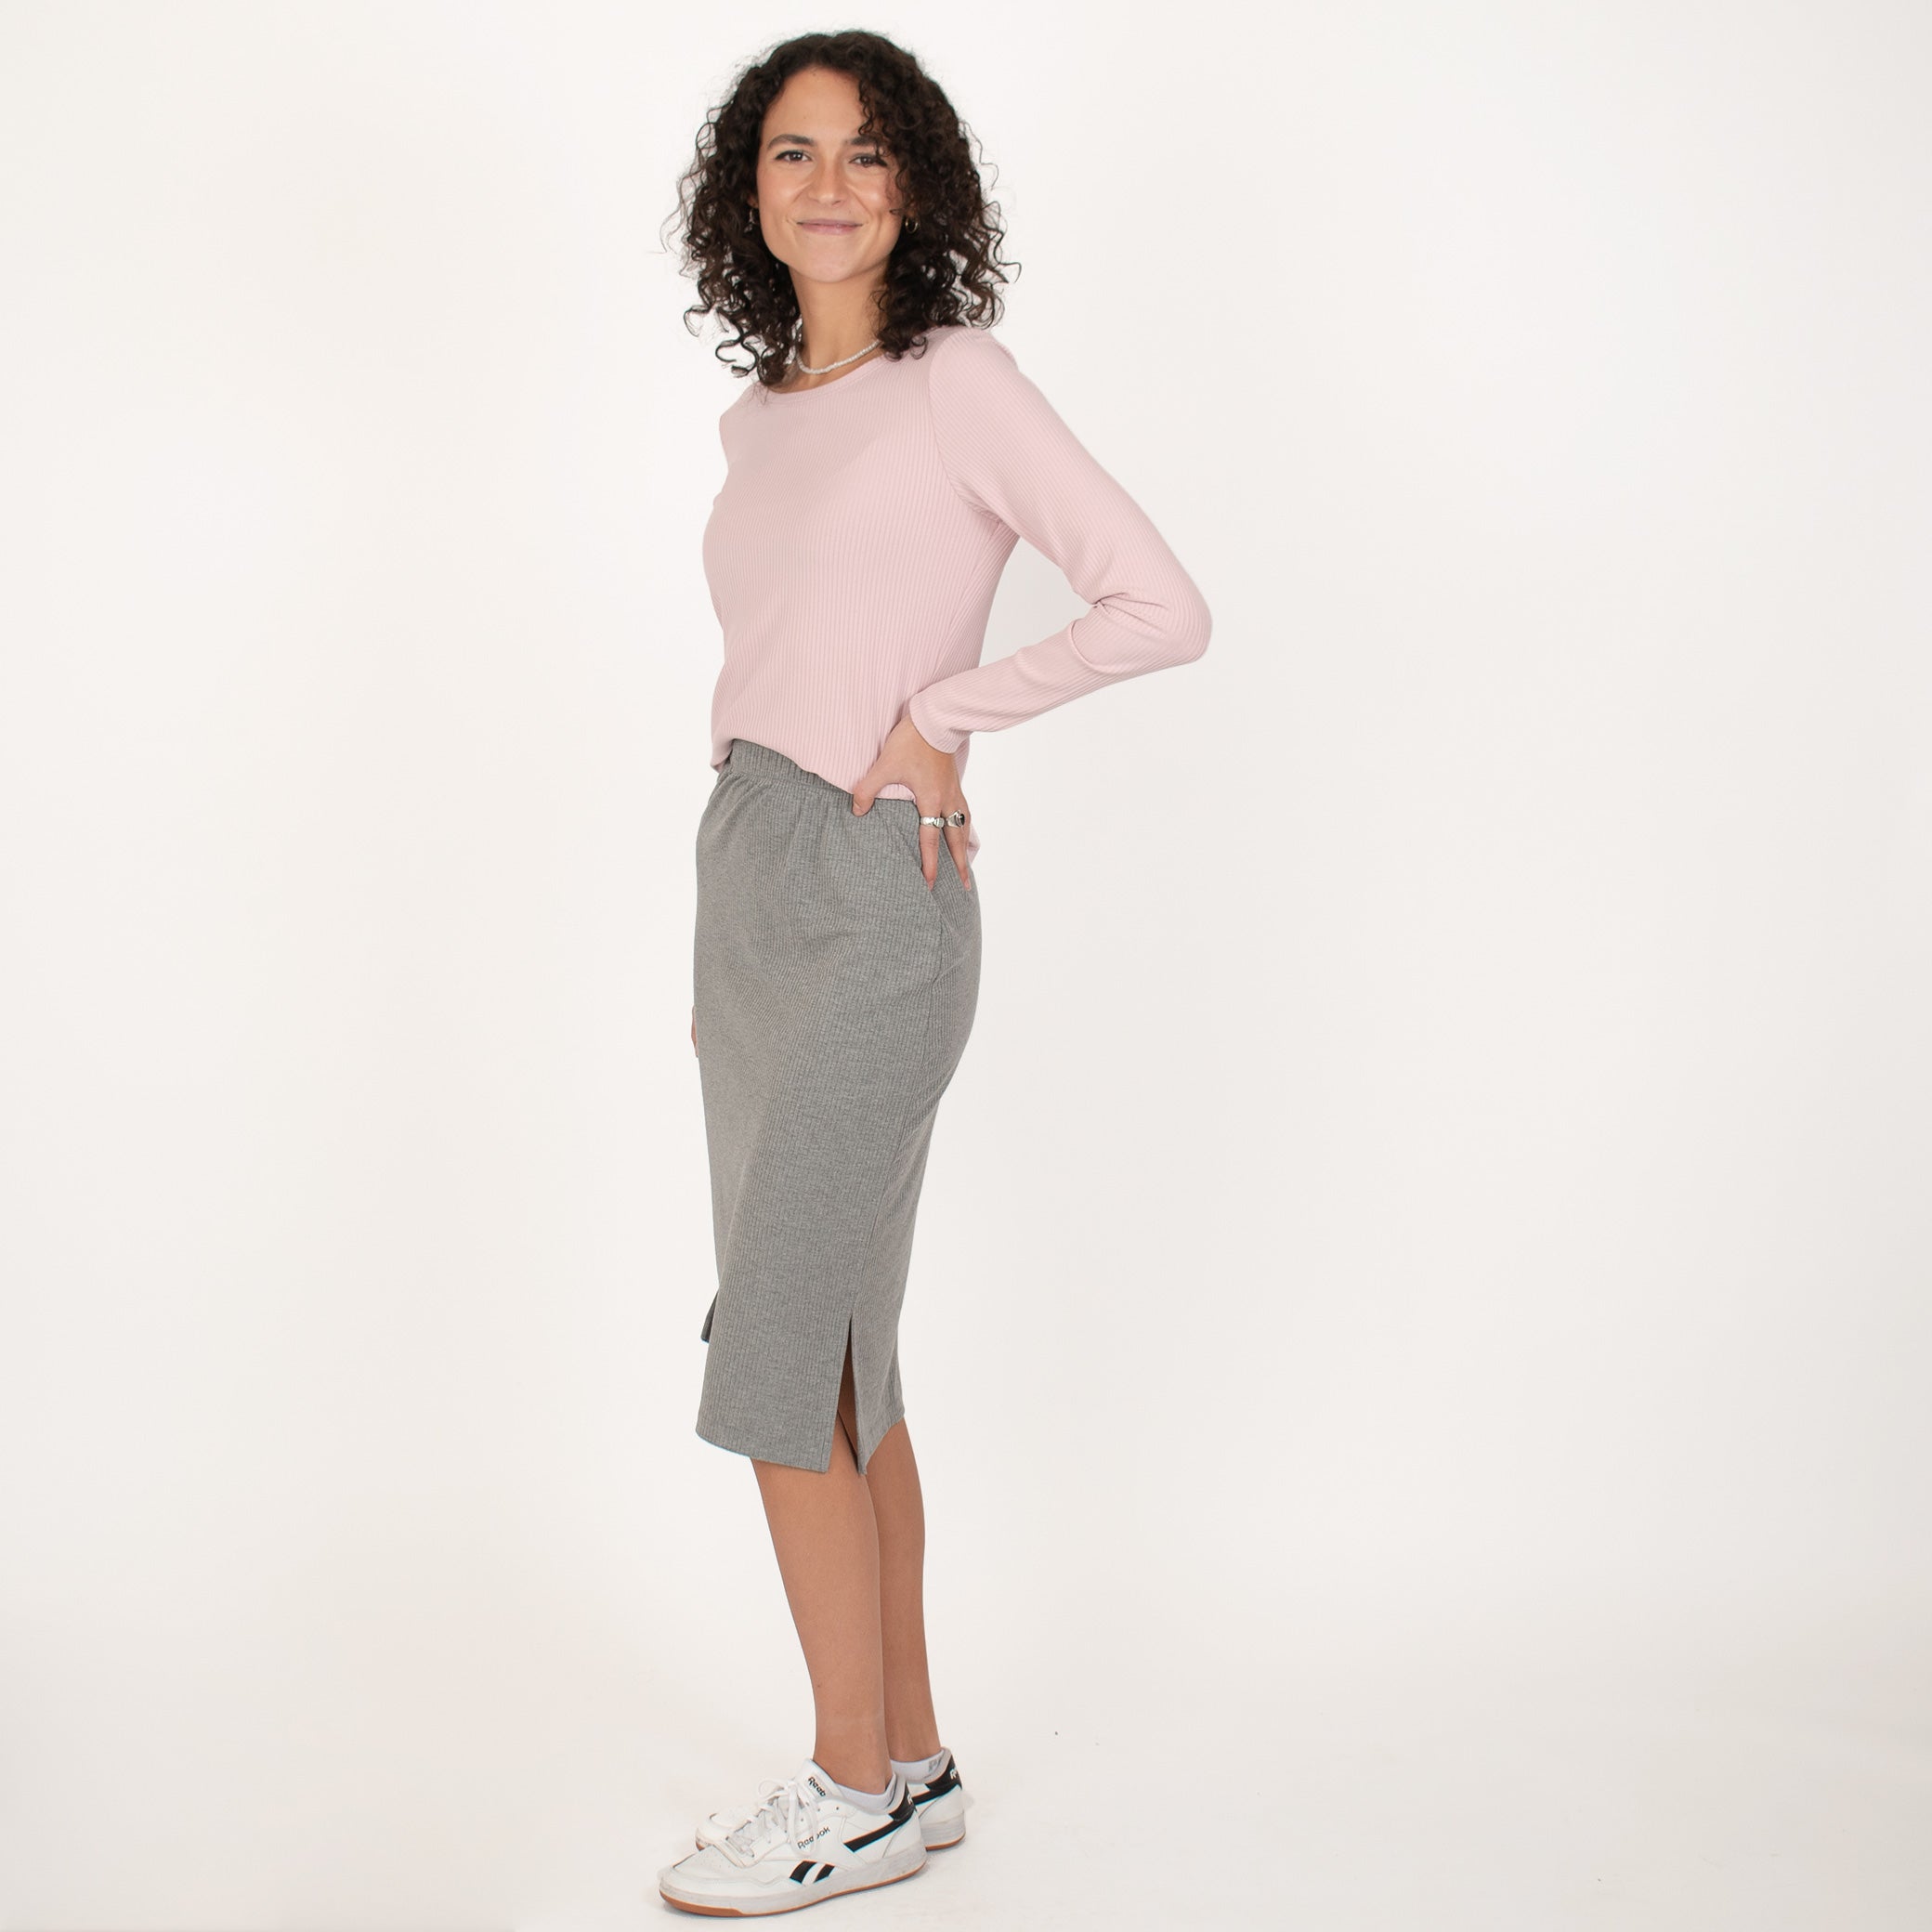 Woman wearing light pink rib knit reversible long sleeve top with grey knee length skirt